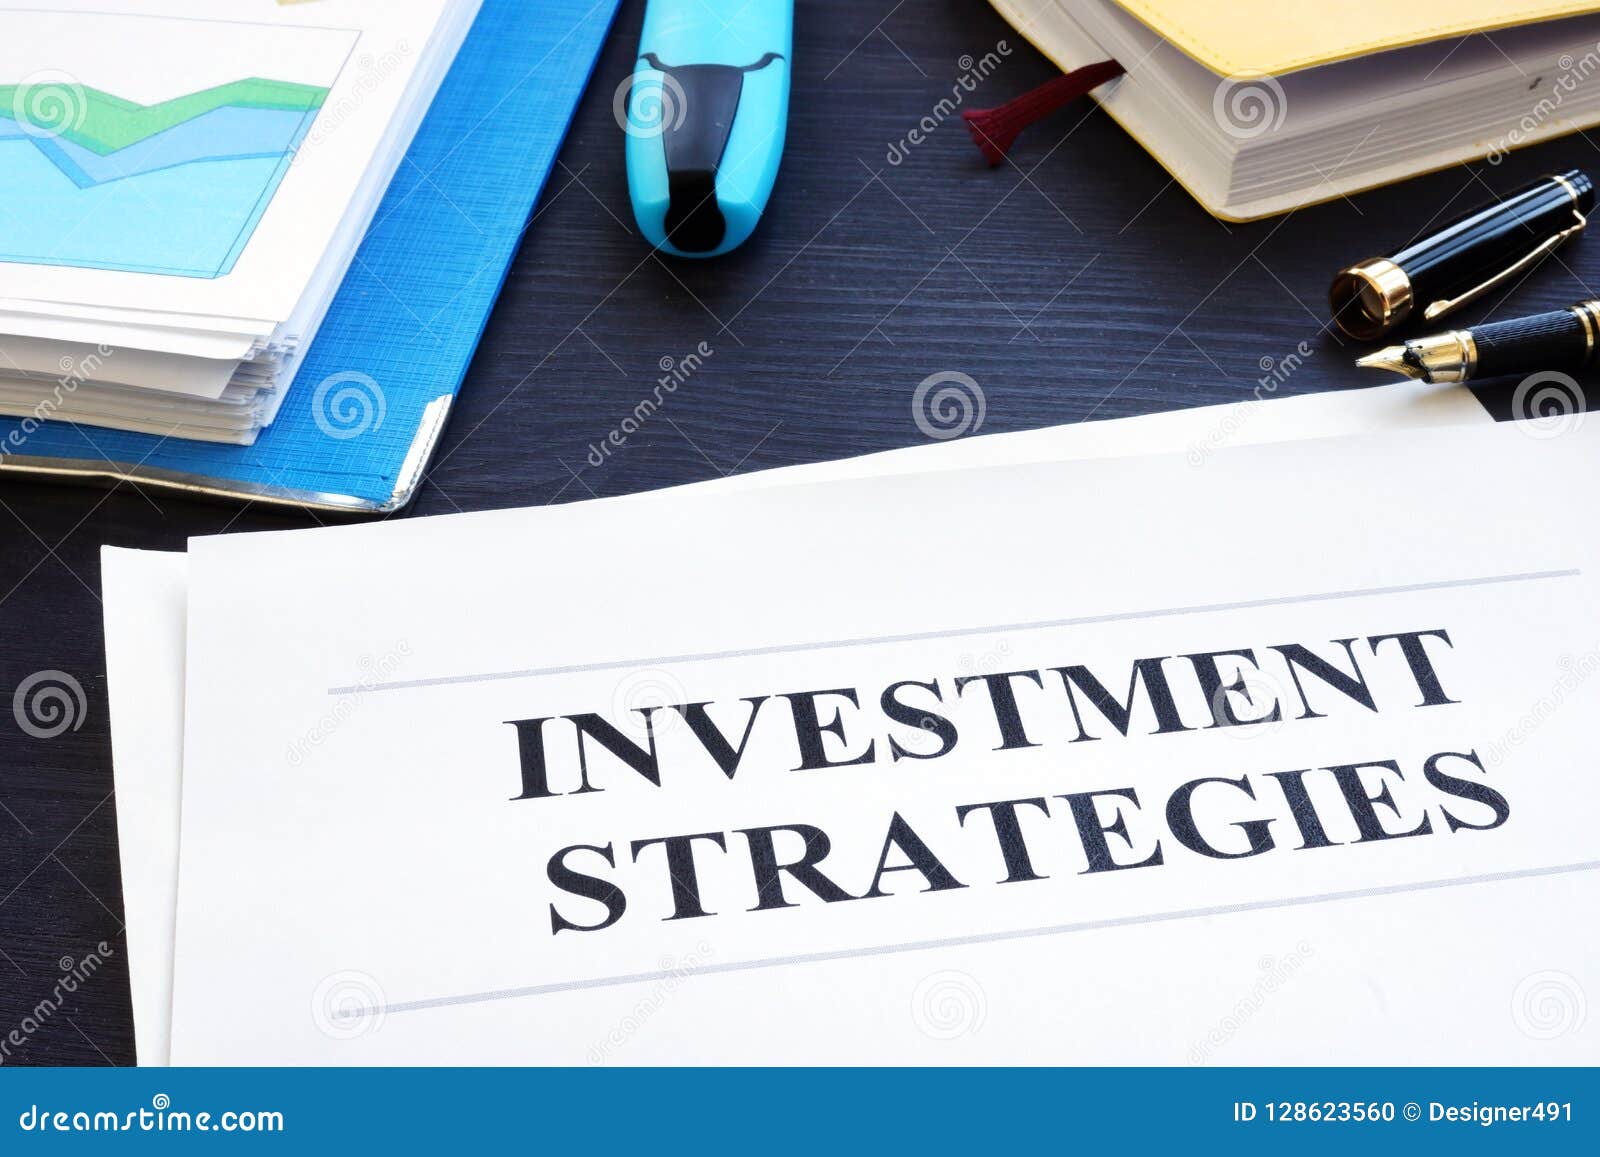 investment strategies and folder with business documents.